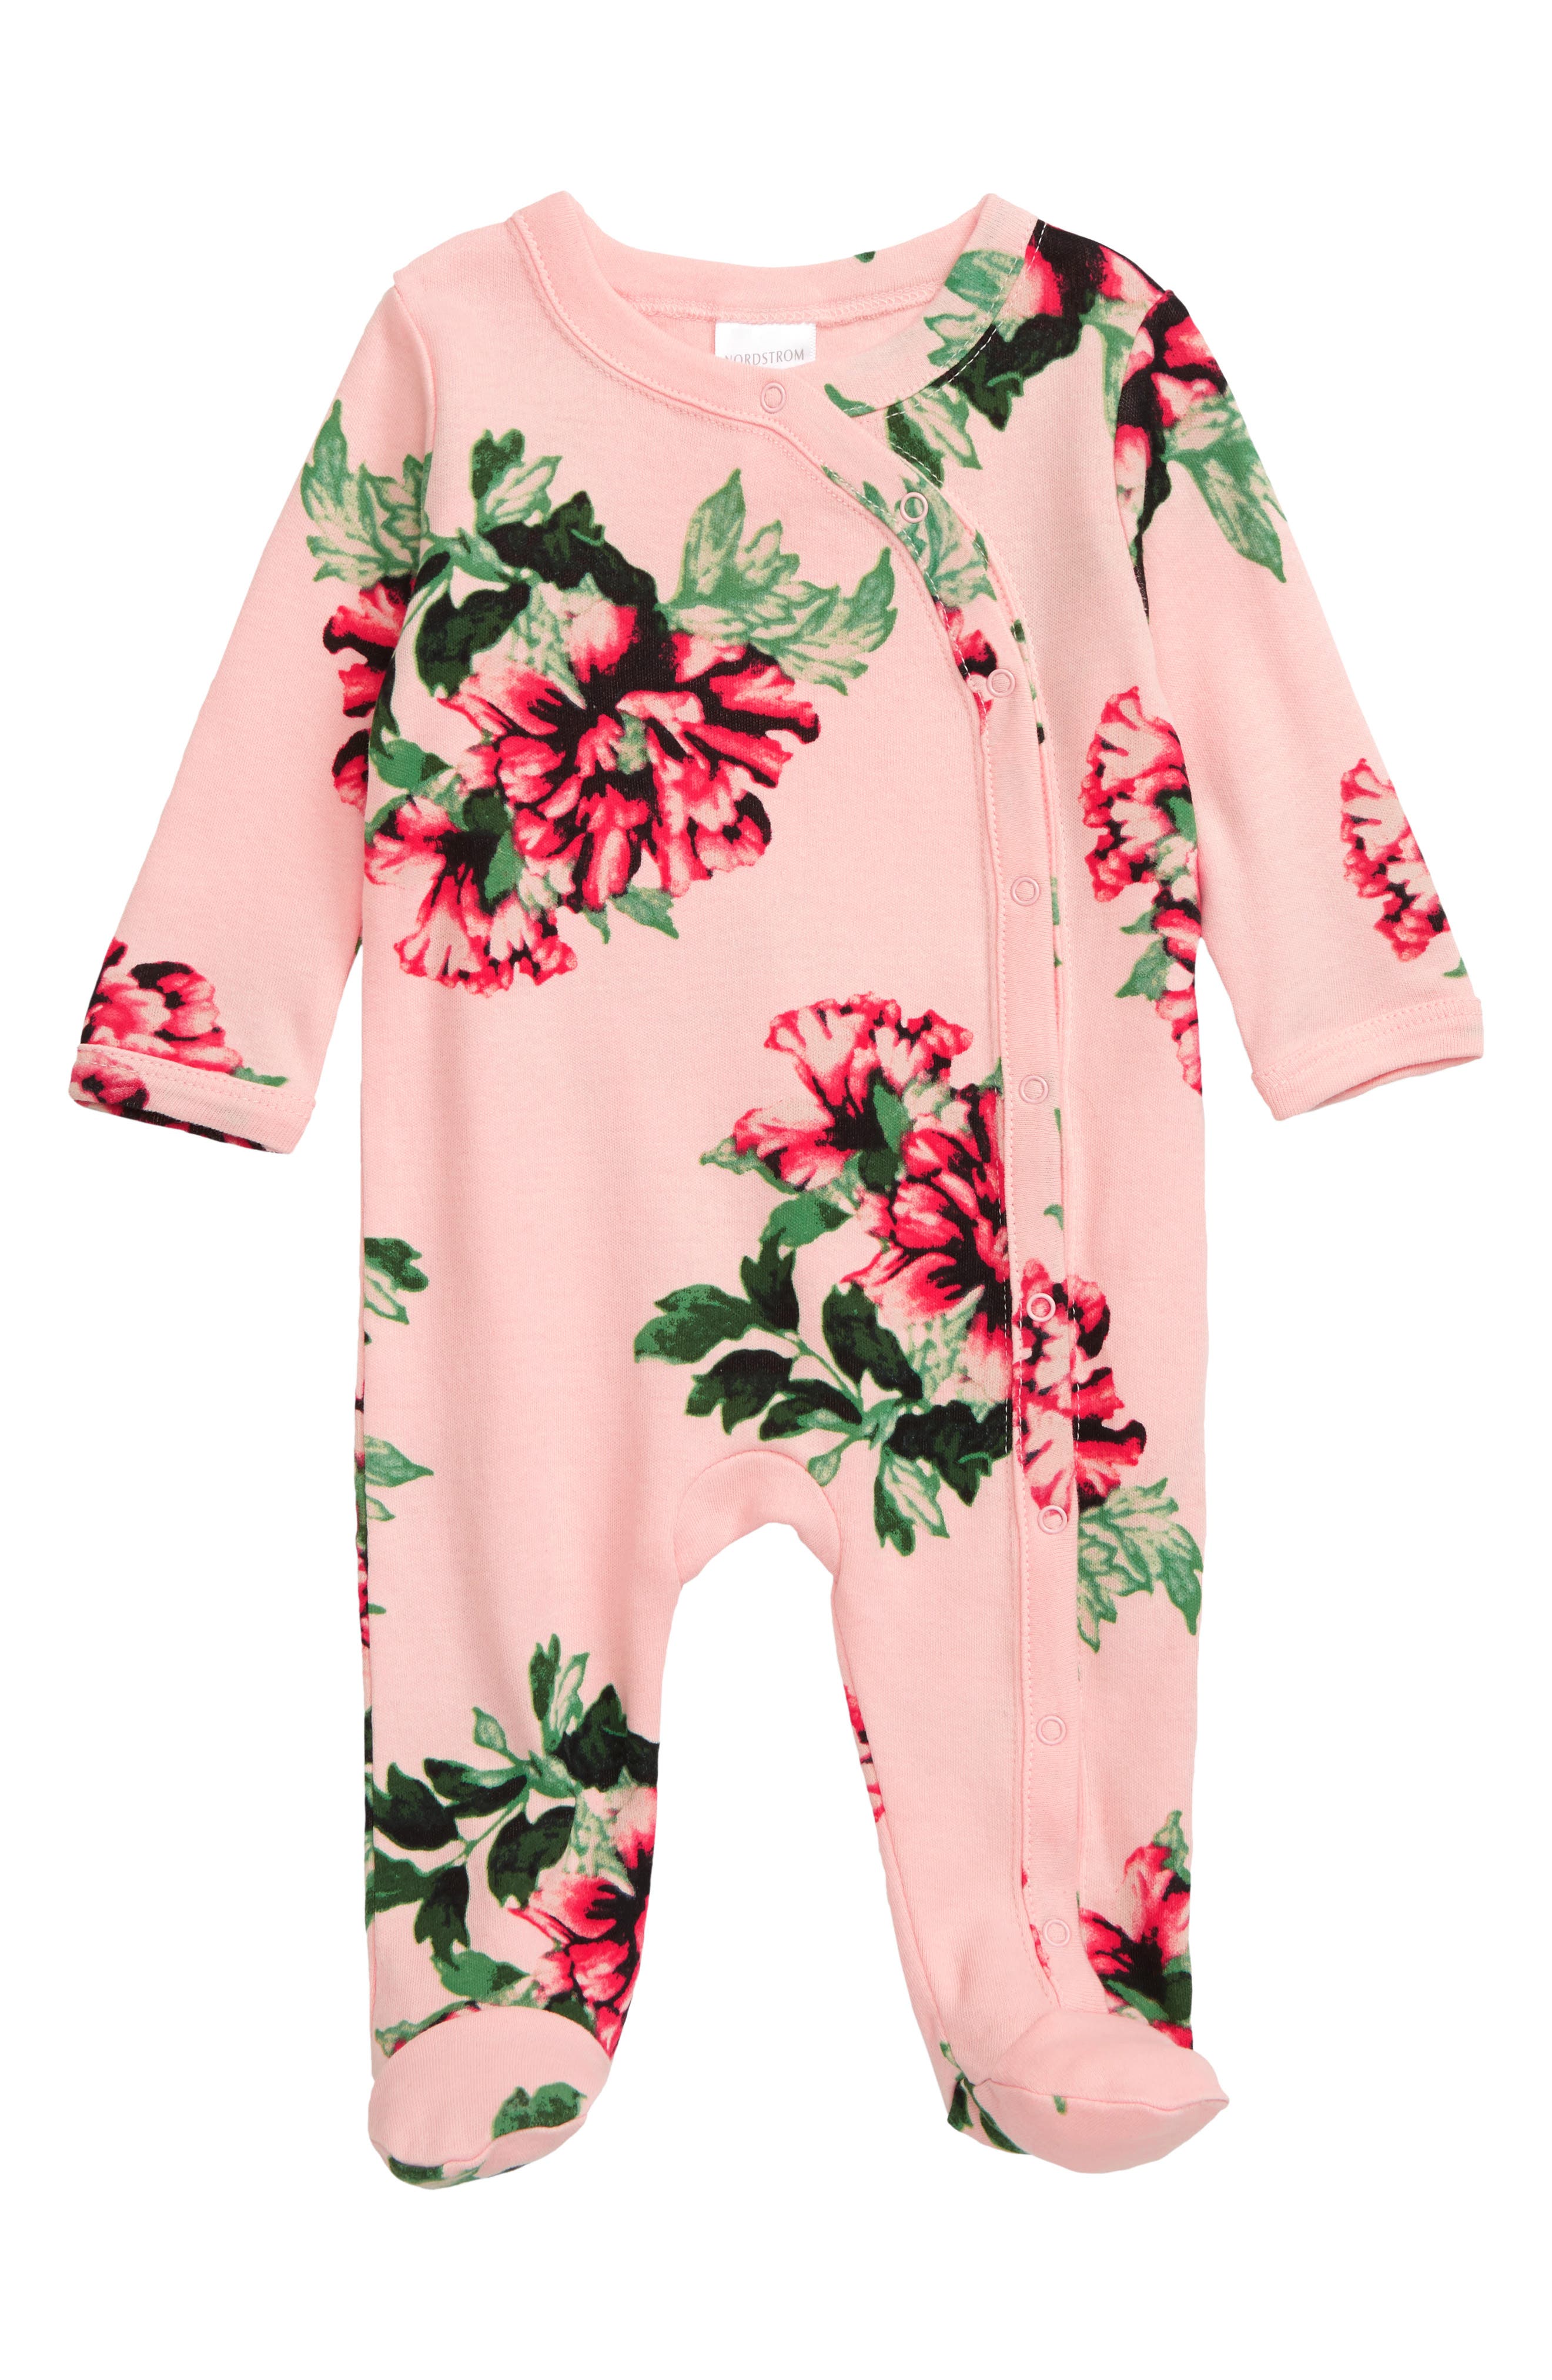 pink baby girl clothes